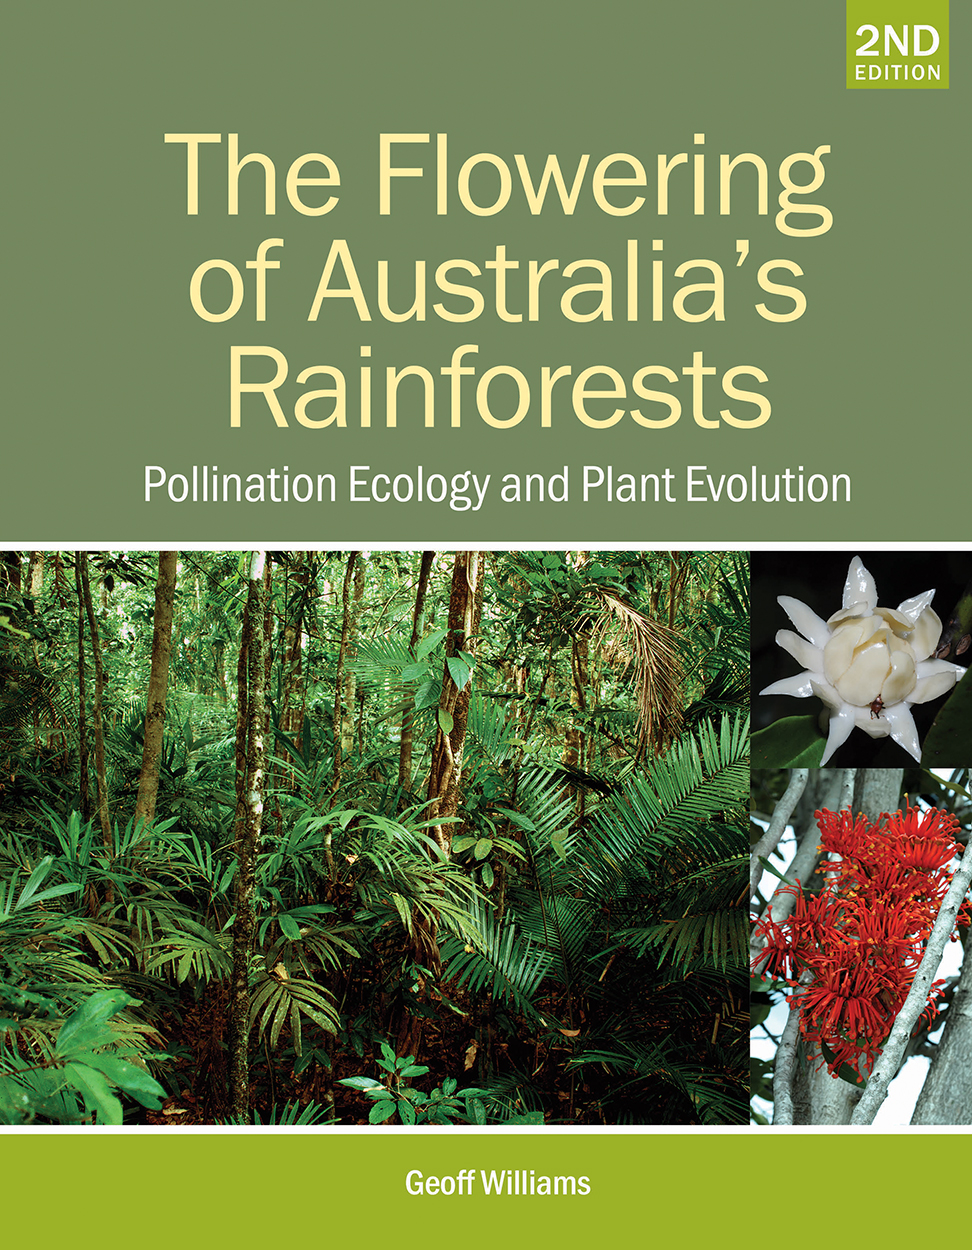 Cover of 'The Flowering of Australia's Rainforests' featuring 3 photos of rainforest vegetation and flowers upon a green background.